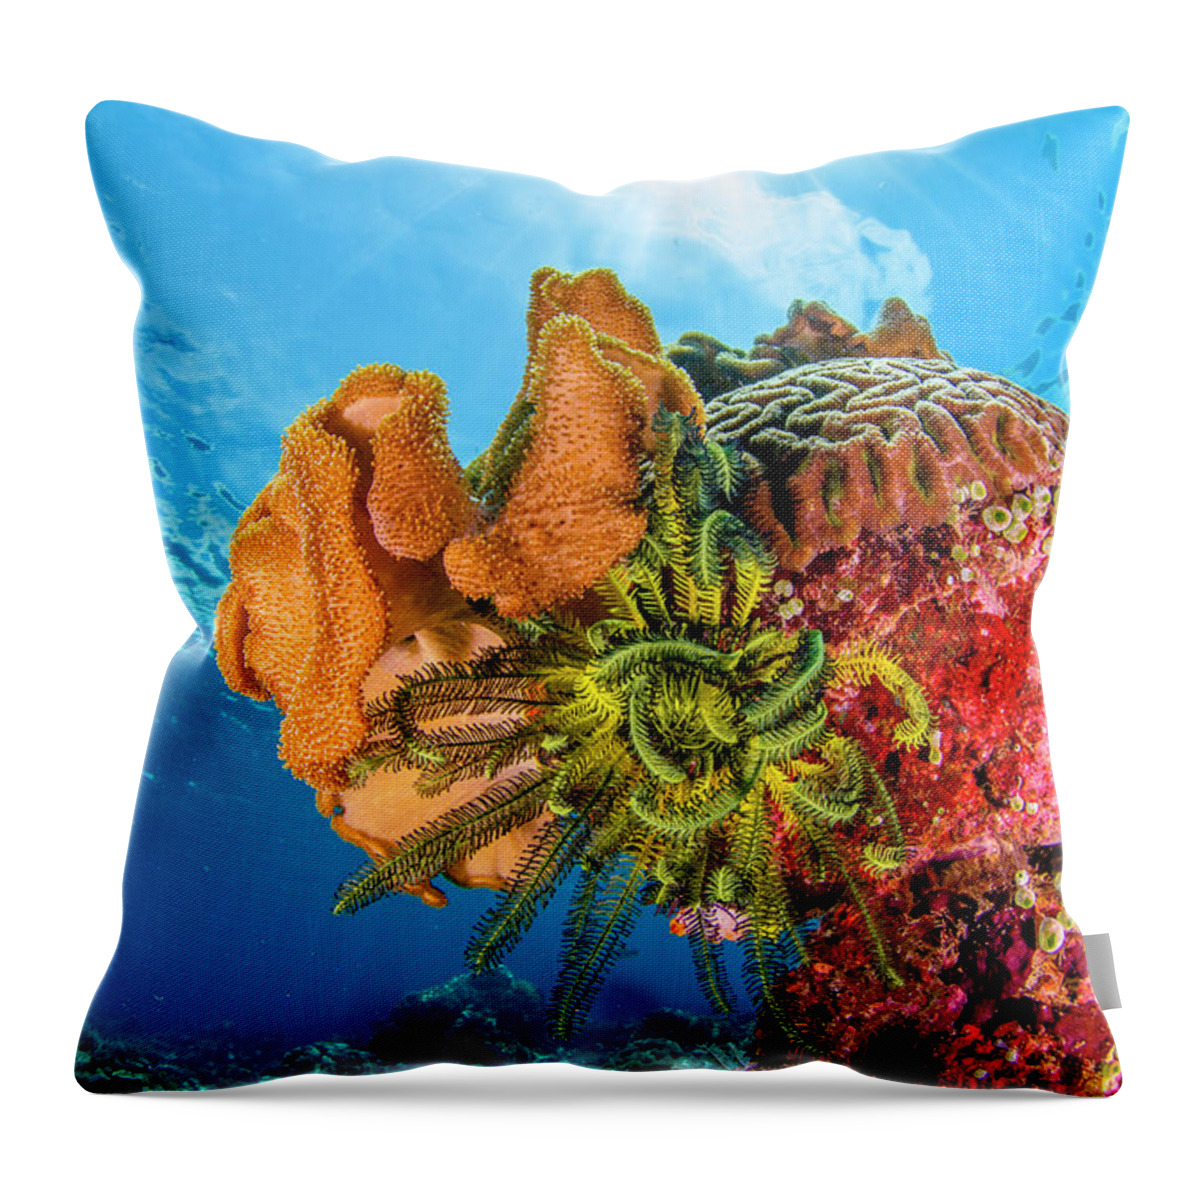 Tranquility Throw Pillow featuring the photograph Coral Reef by Raimundo Fernandez Diez